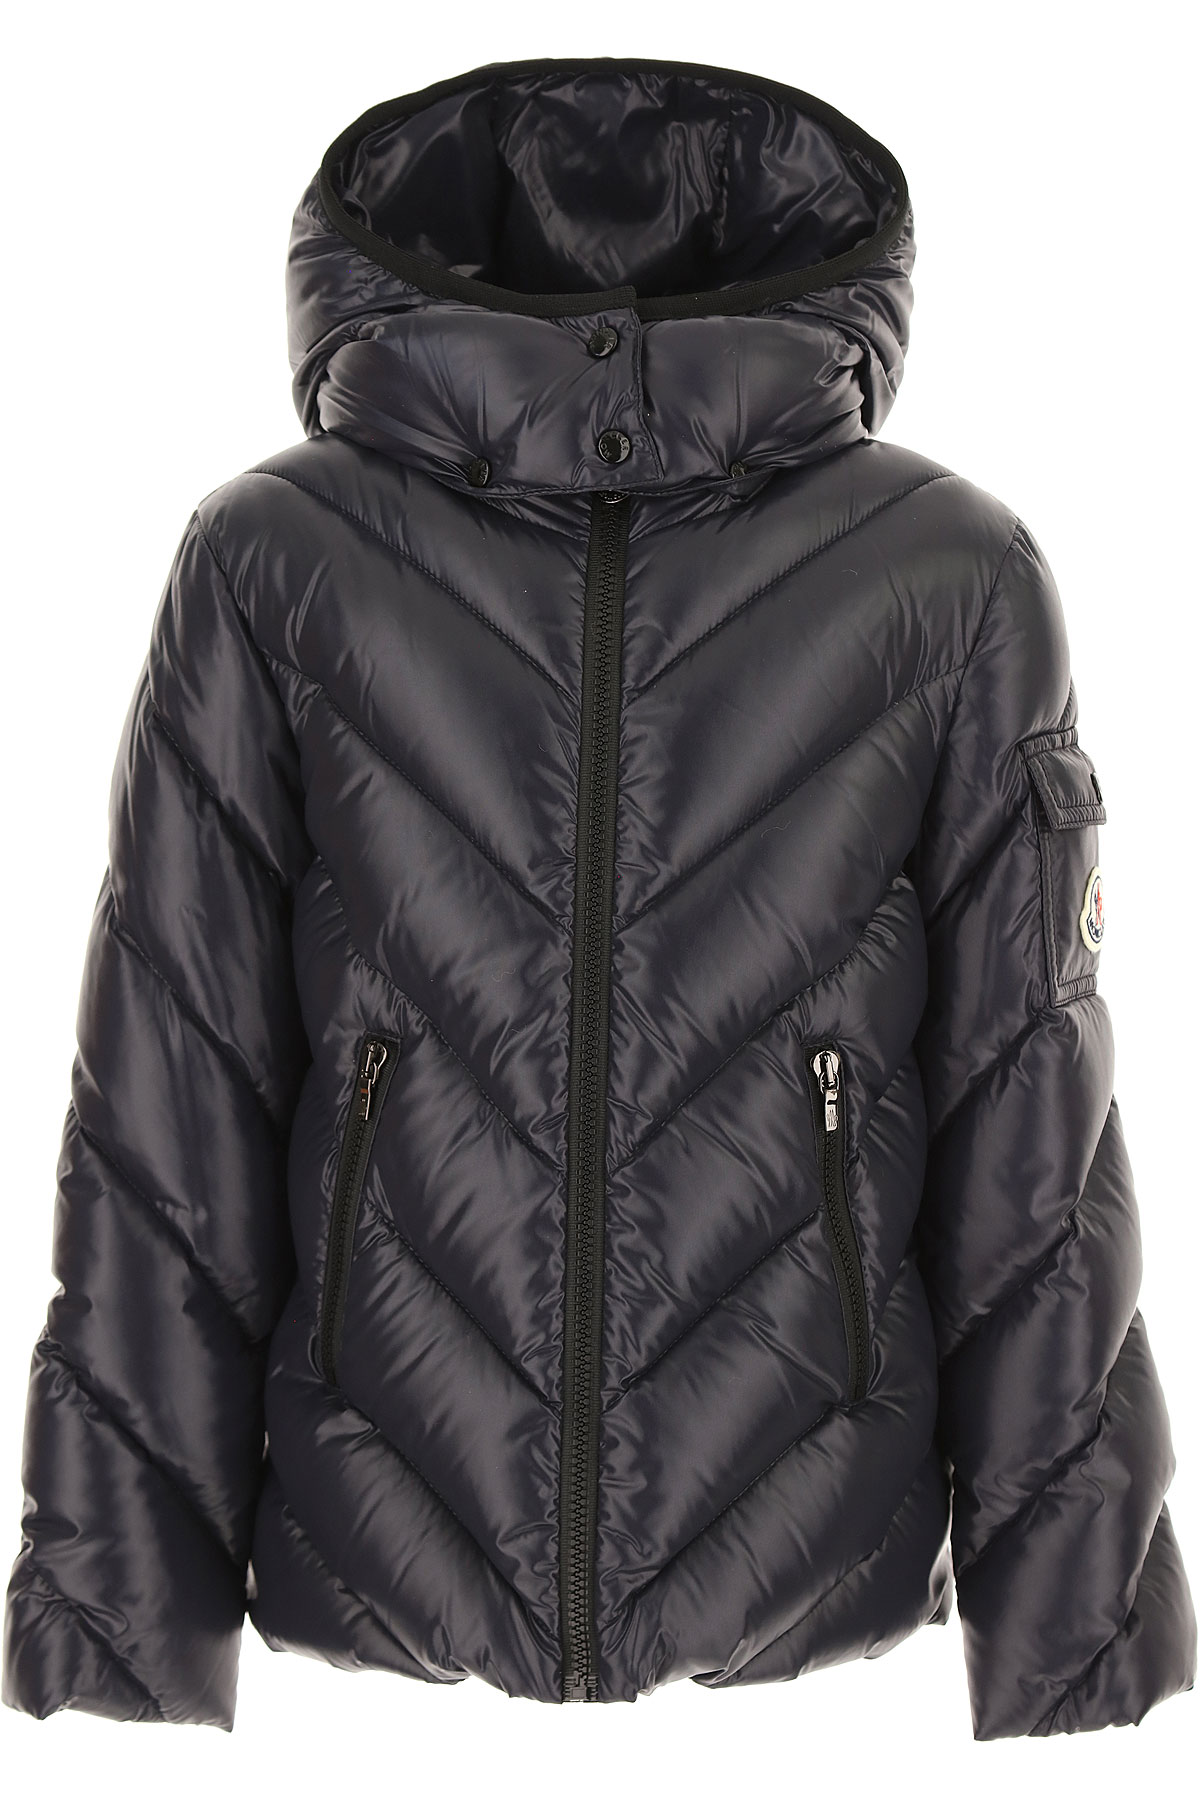 Girls Clothing Moncler, Style code: 1a56010-c0064-742